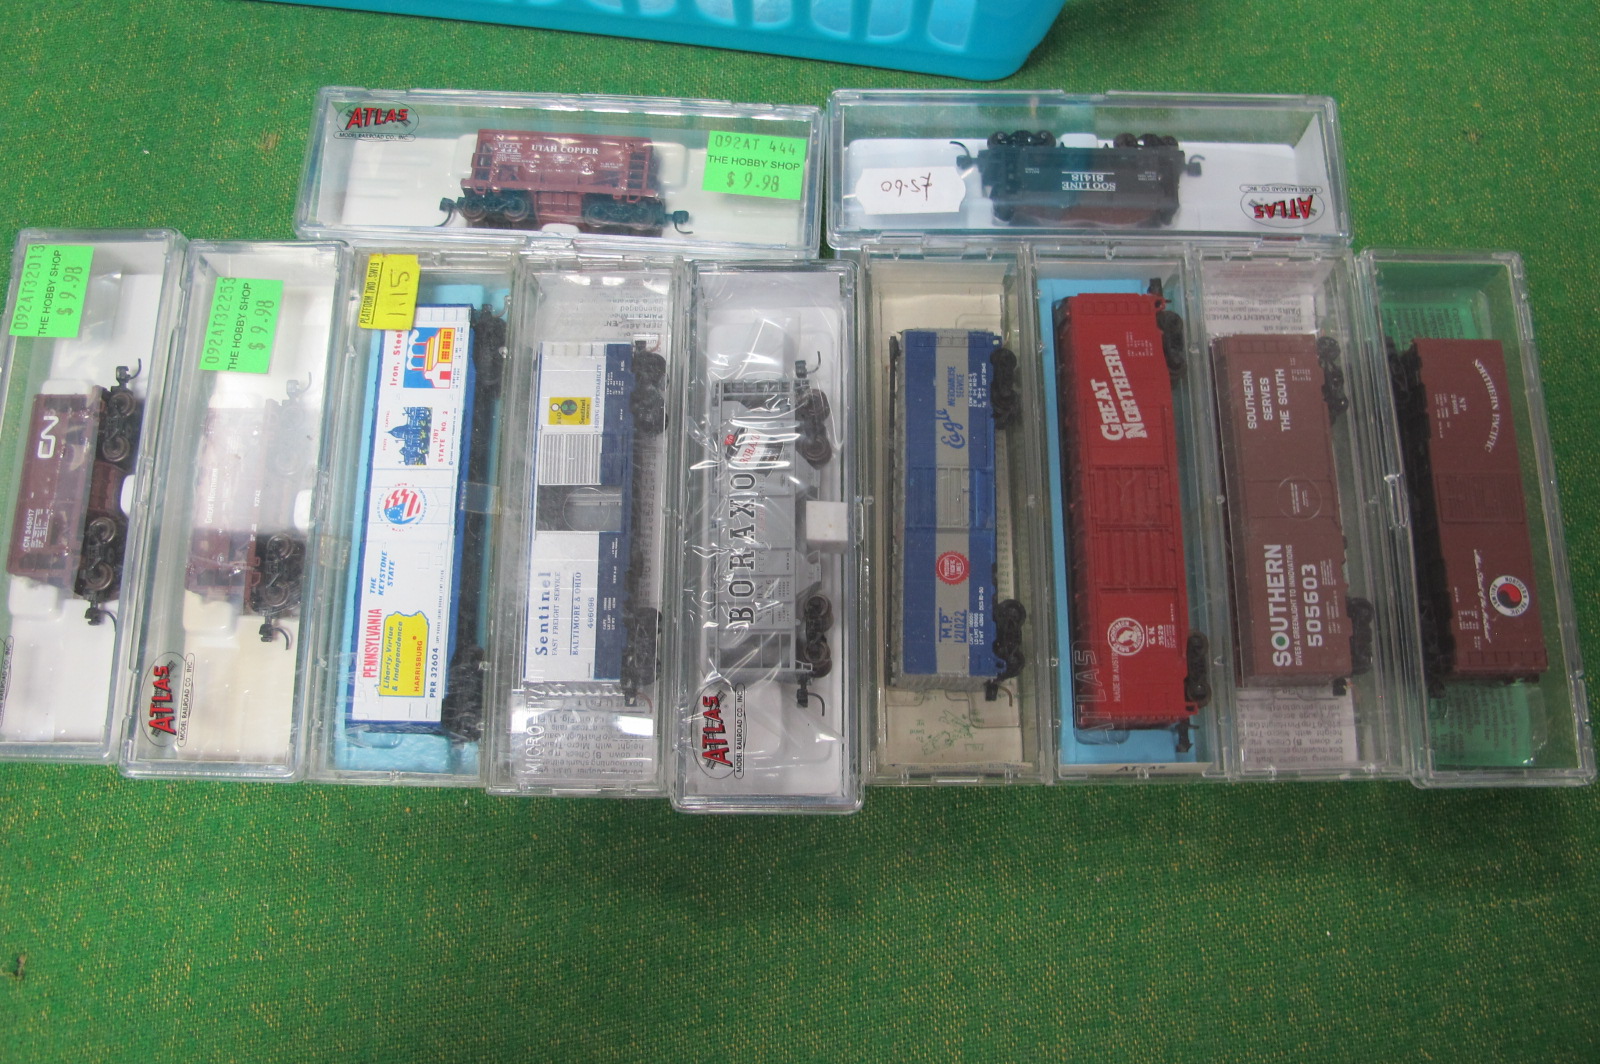 Eleven 'N' Gauge American Outline Eight Wheel Boxcars/Hoppers etc, by Atlas and others, used,